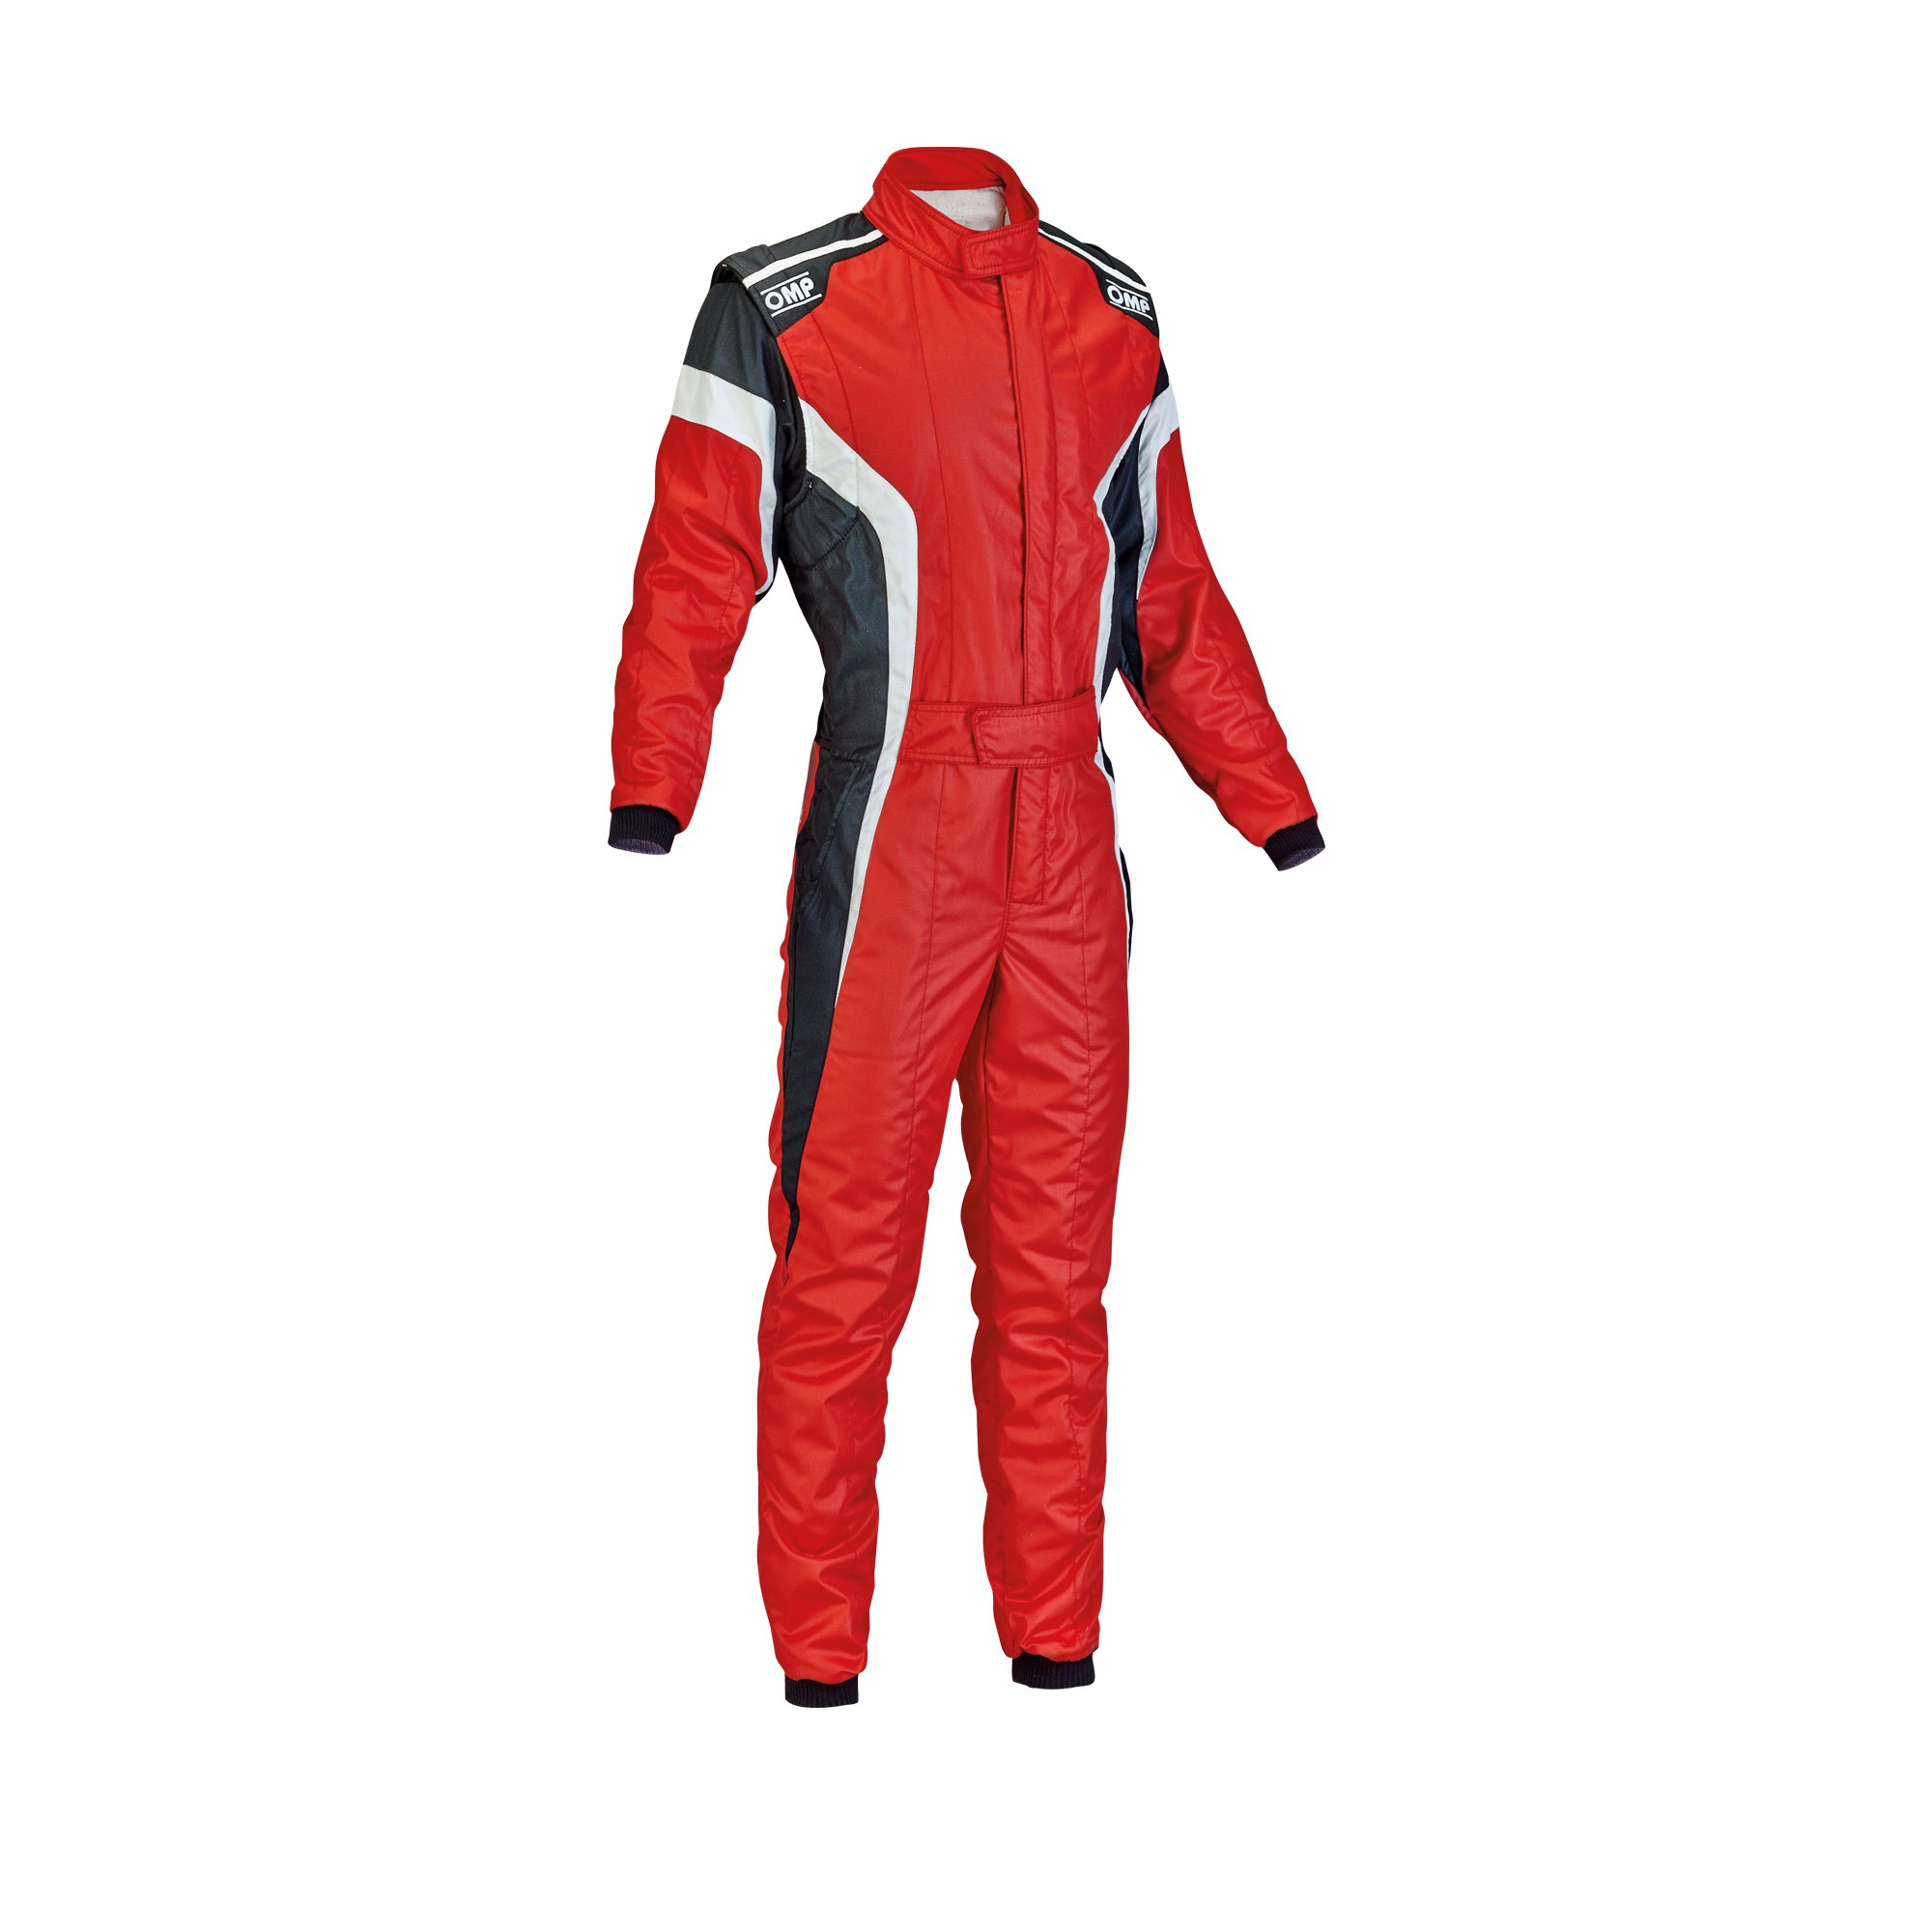 TECNICA-S OVERALL RED/WHITE SIZE 44